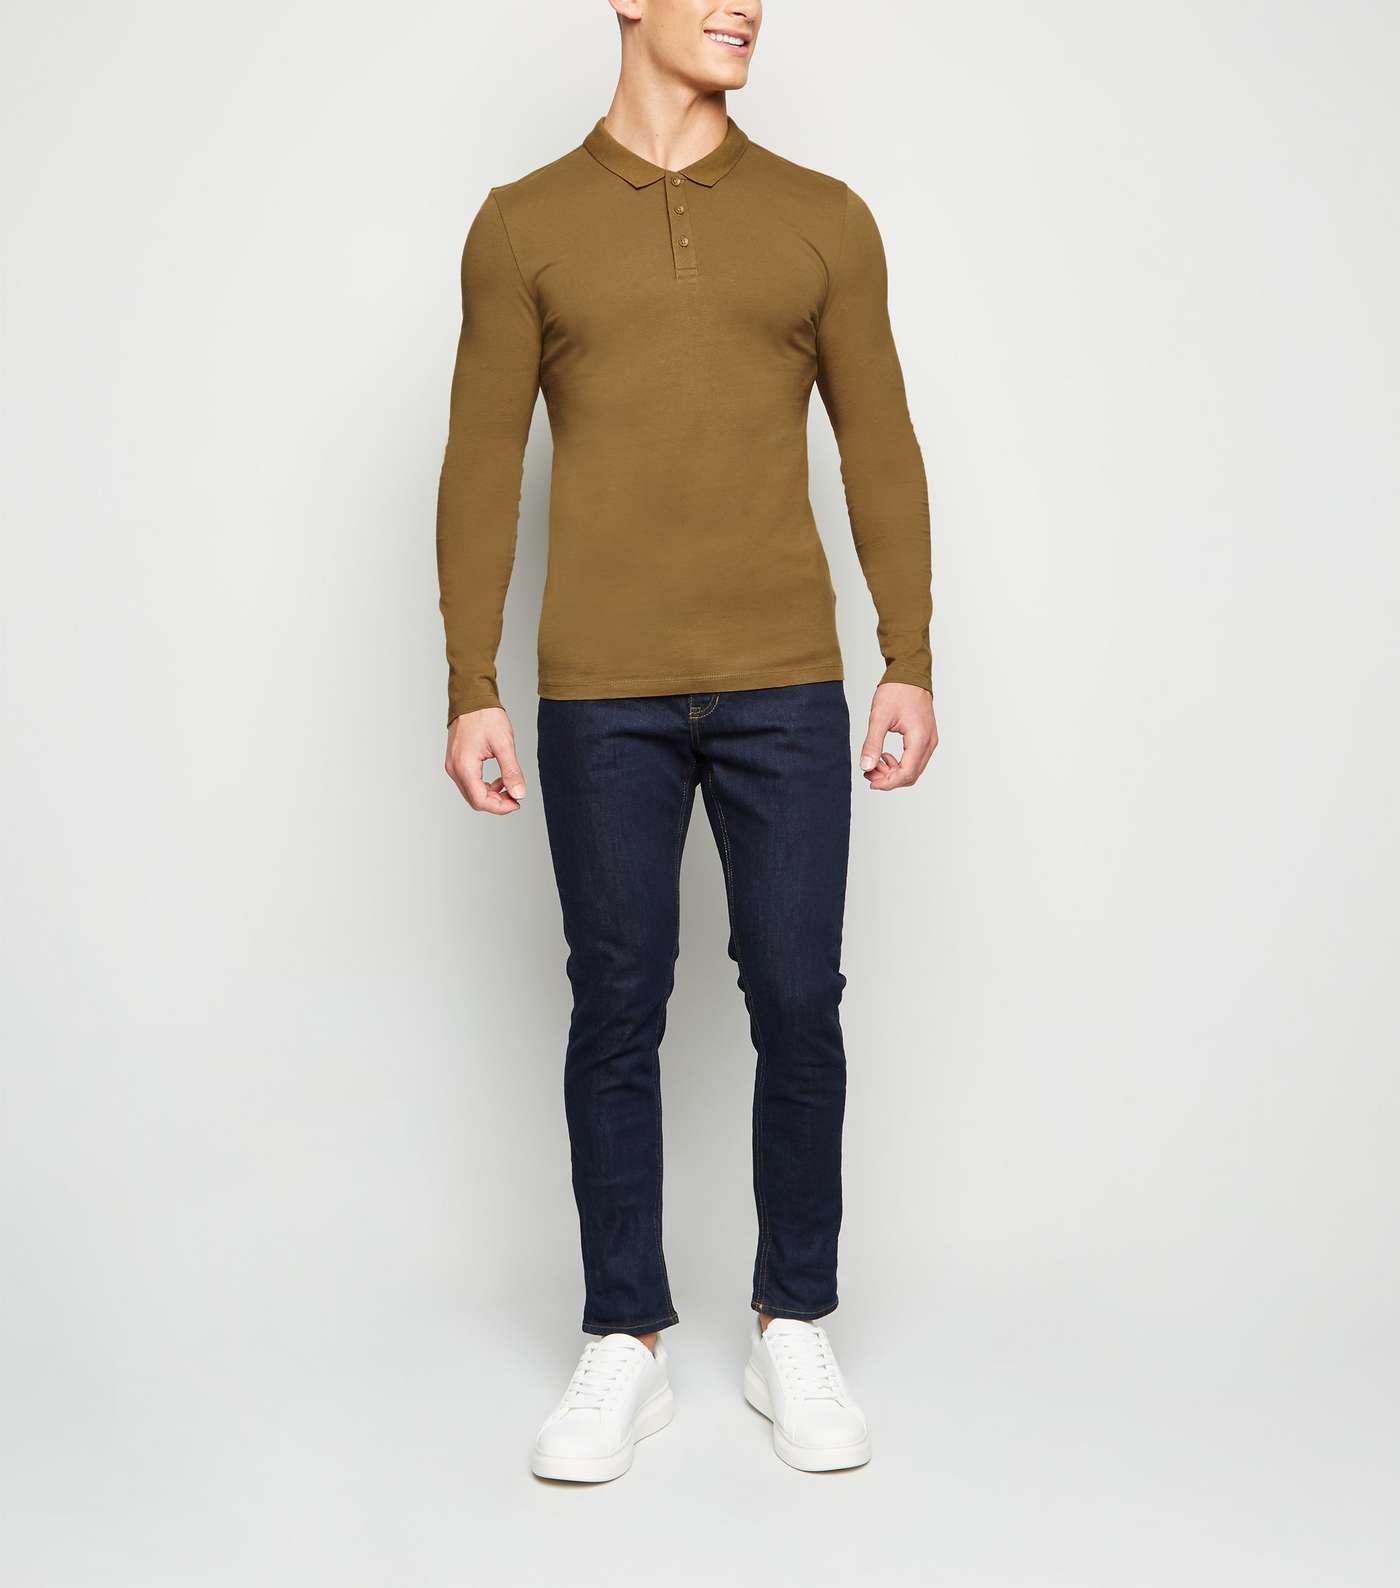 Camel Long Sleeve Muscle Fit Polo Shirt Image 2